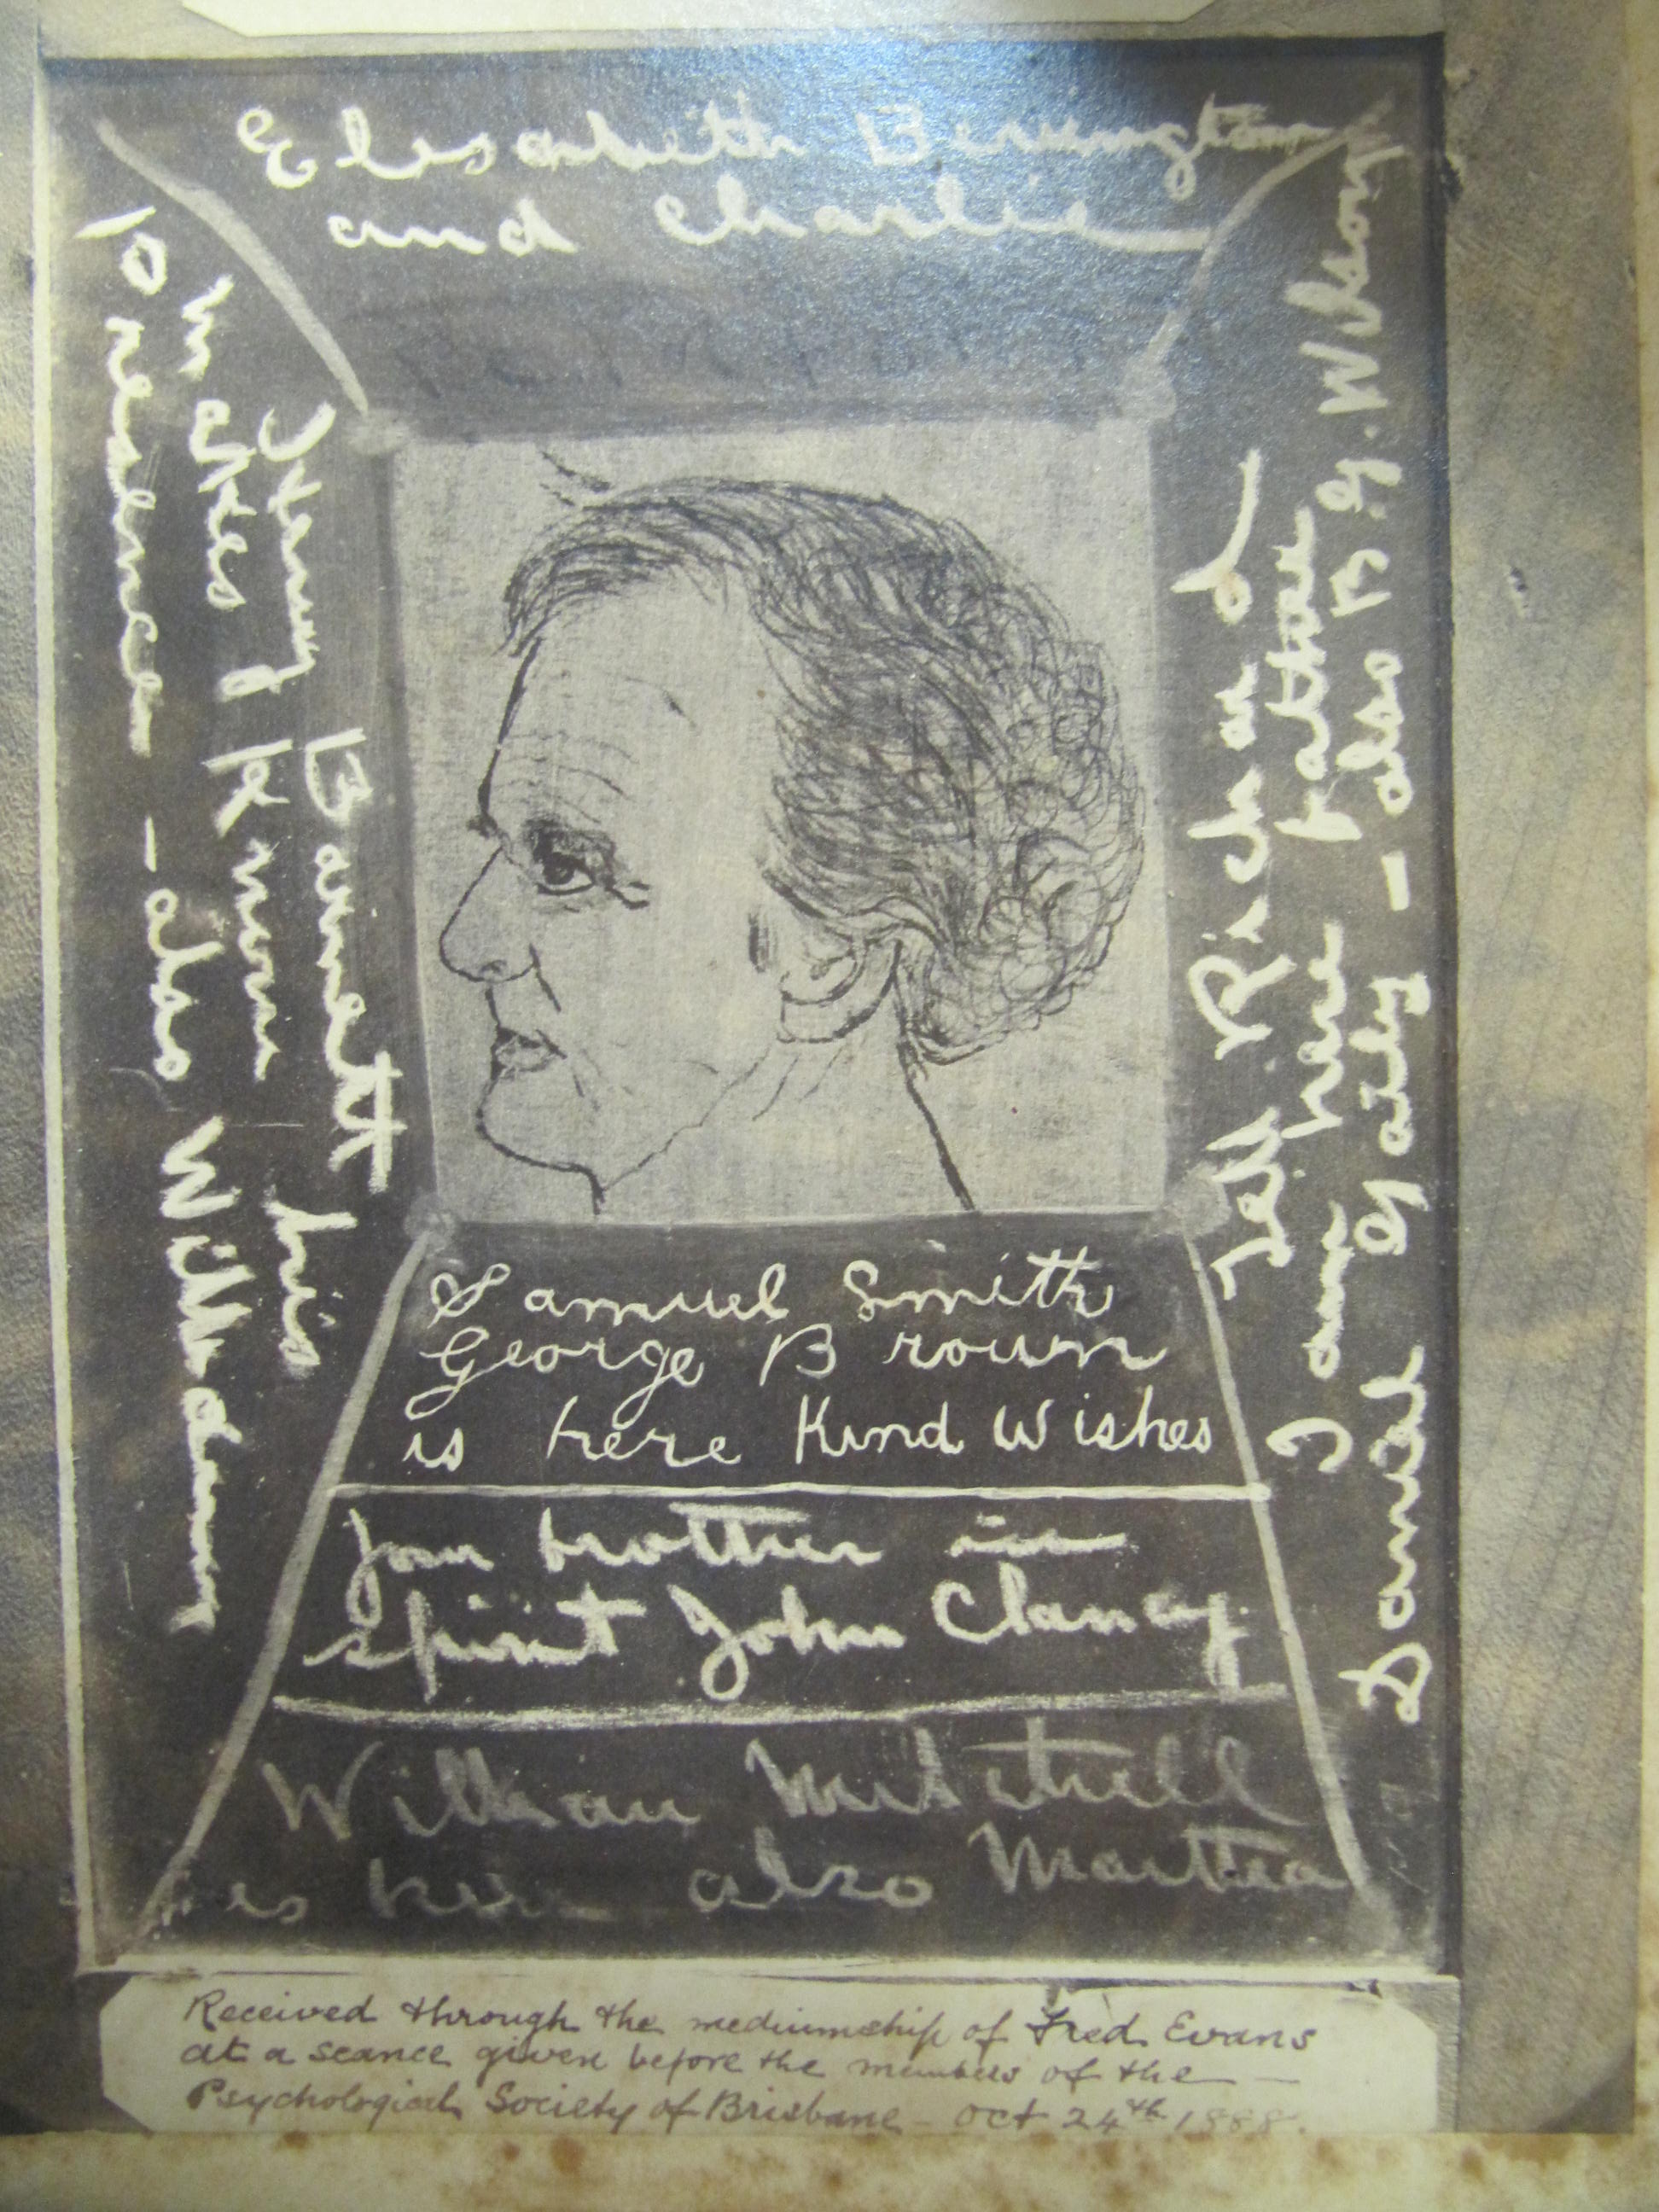 Photograph of spirit slate-writing which occurred during a séance in Brisbane on 24 October 1888.